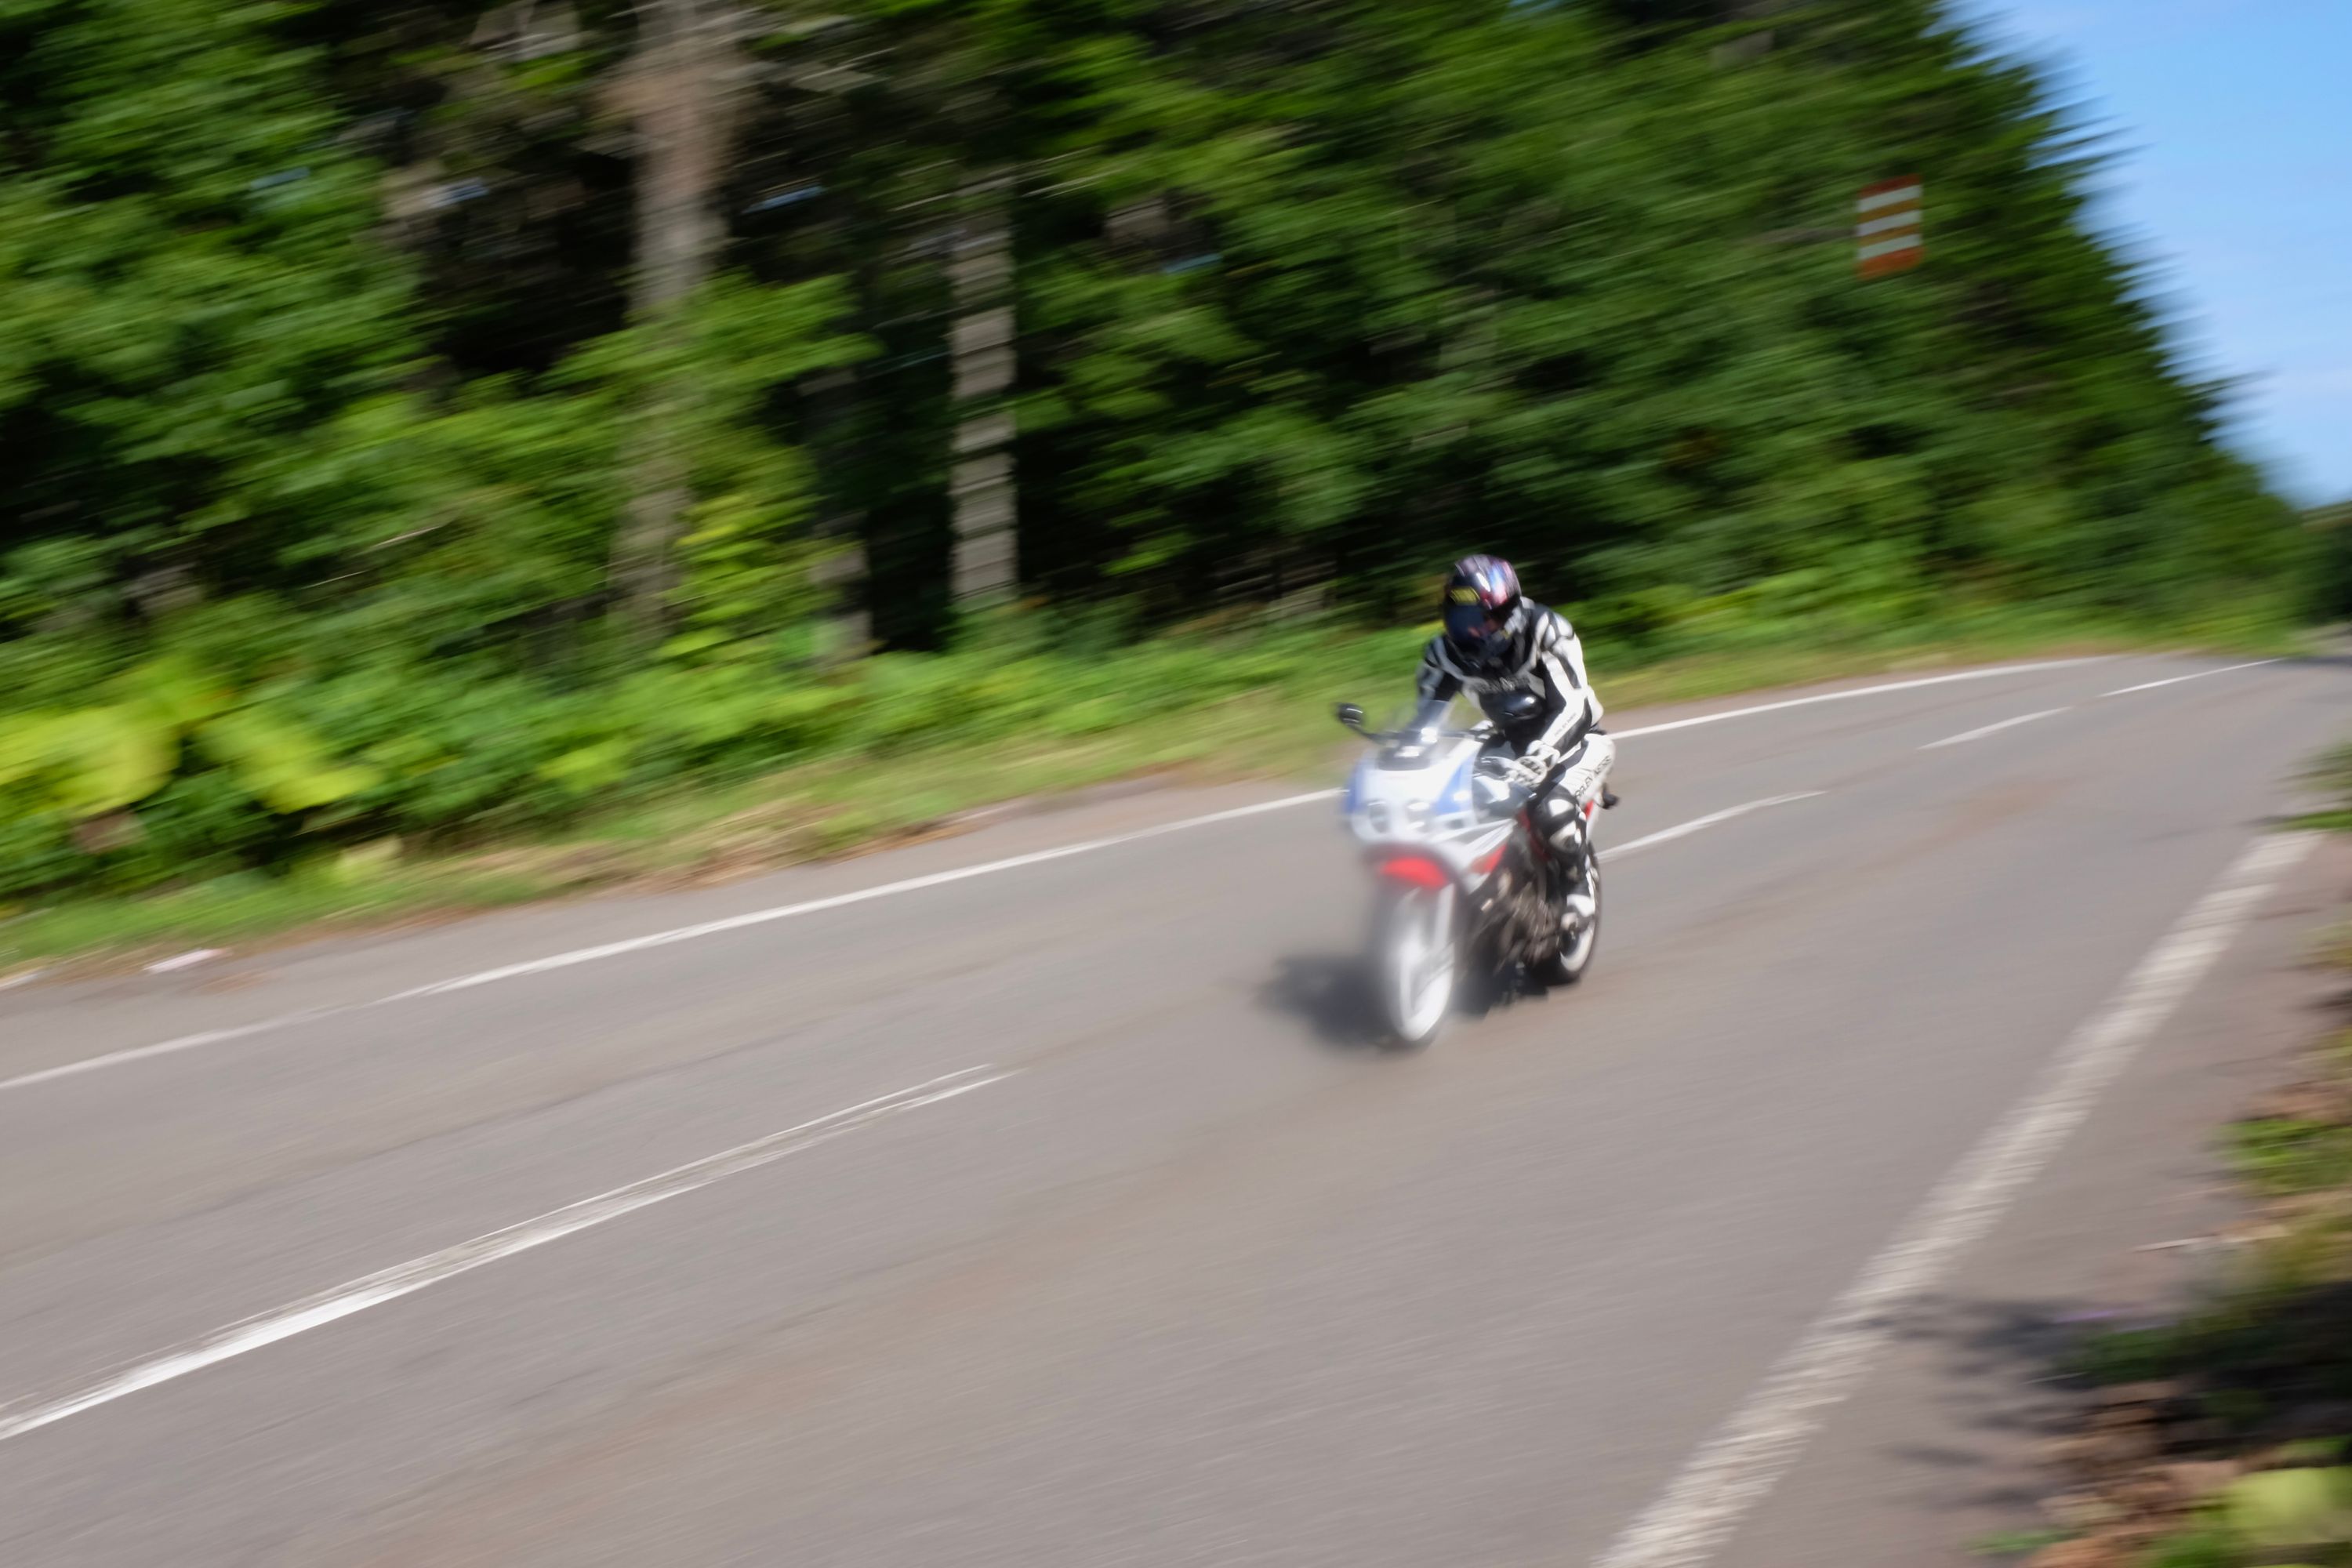 A white motorcycle speeds down a narrow road, its motion blurred.